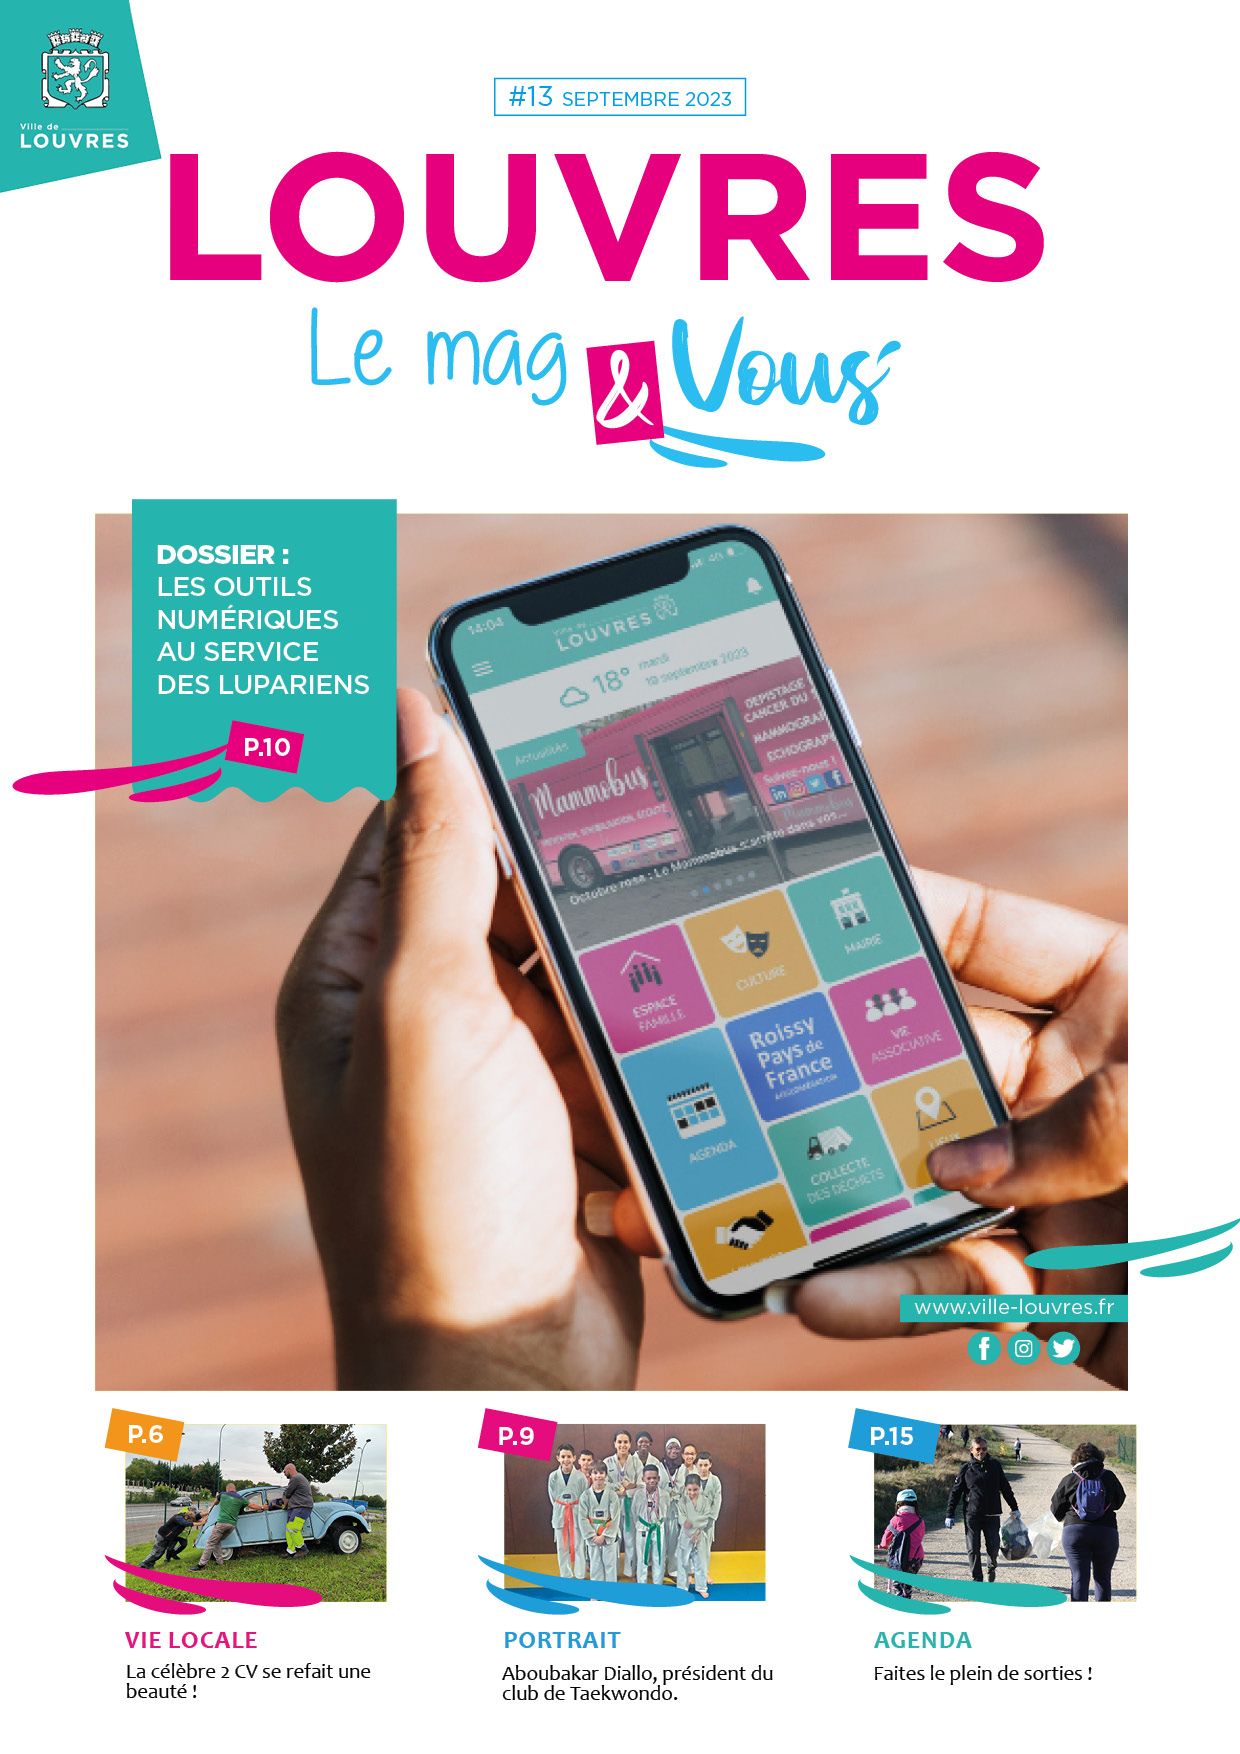 #13_LeMag&Vous page 1